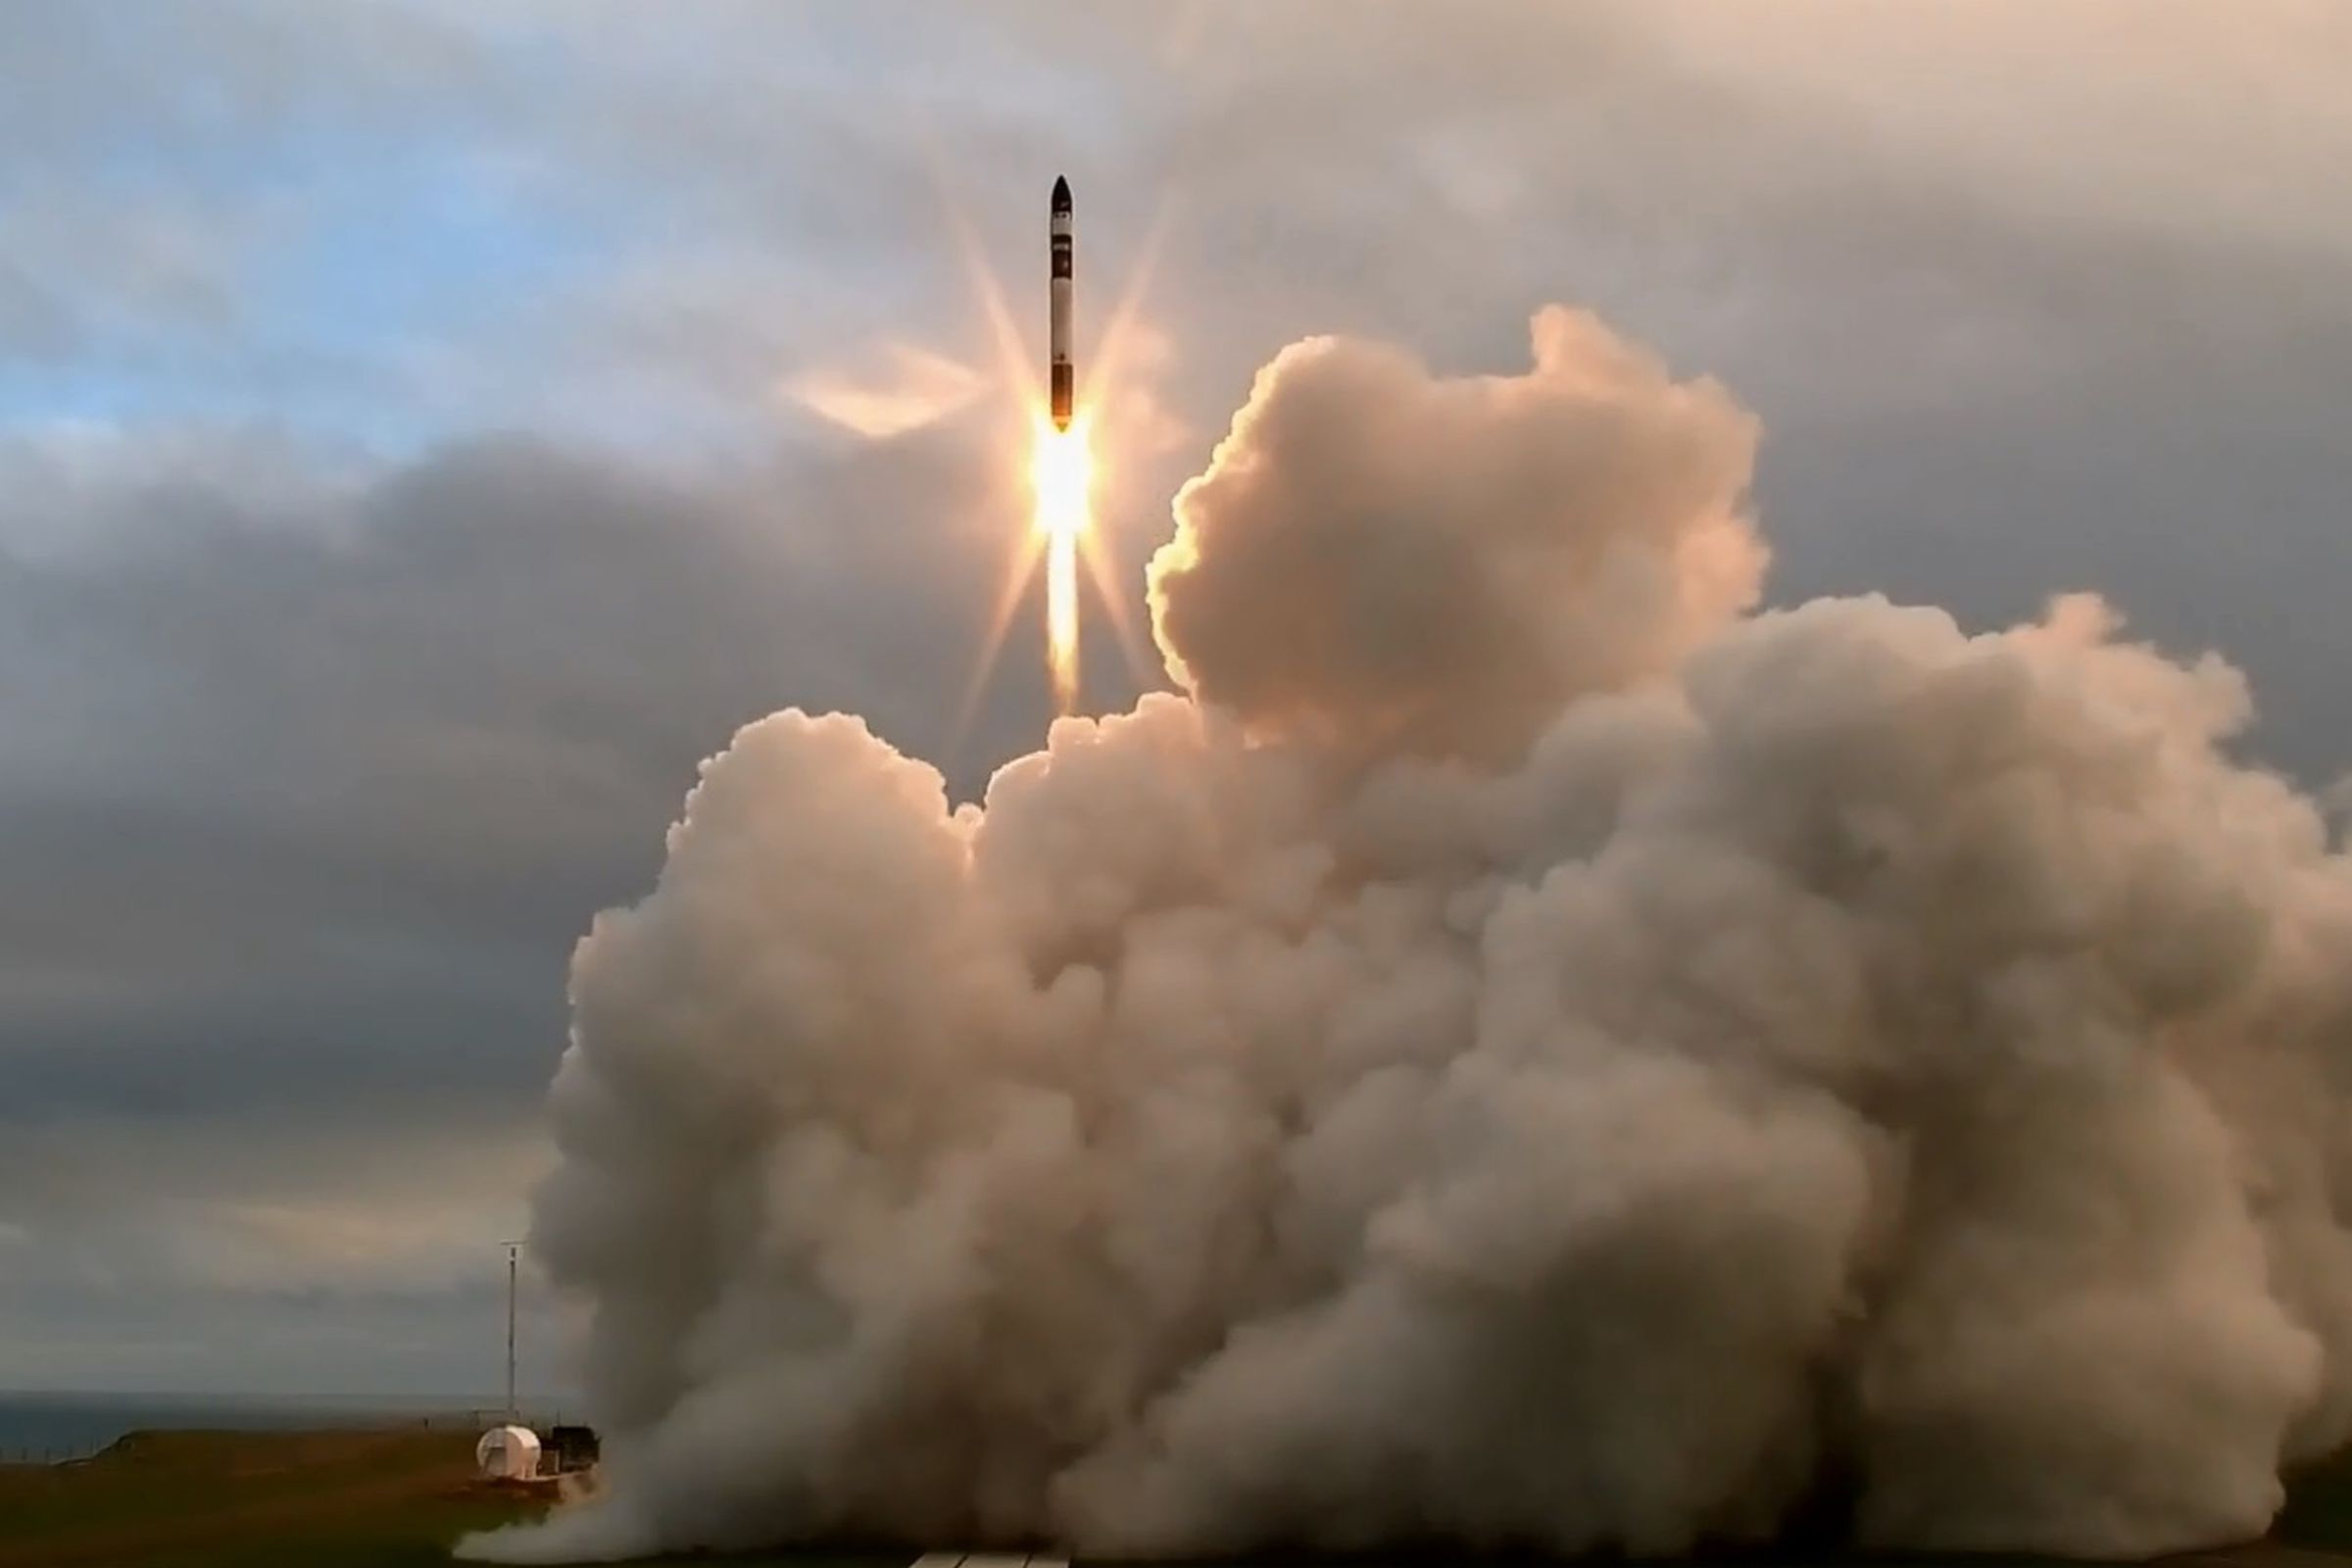 Rocket Lab’s Electron vehicle taking off during its first test flight.